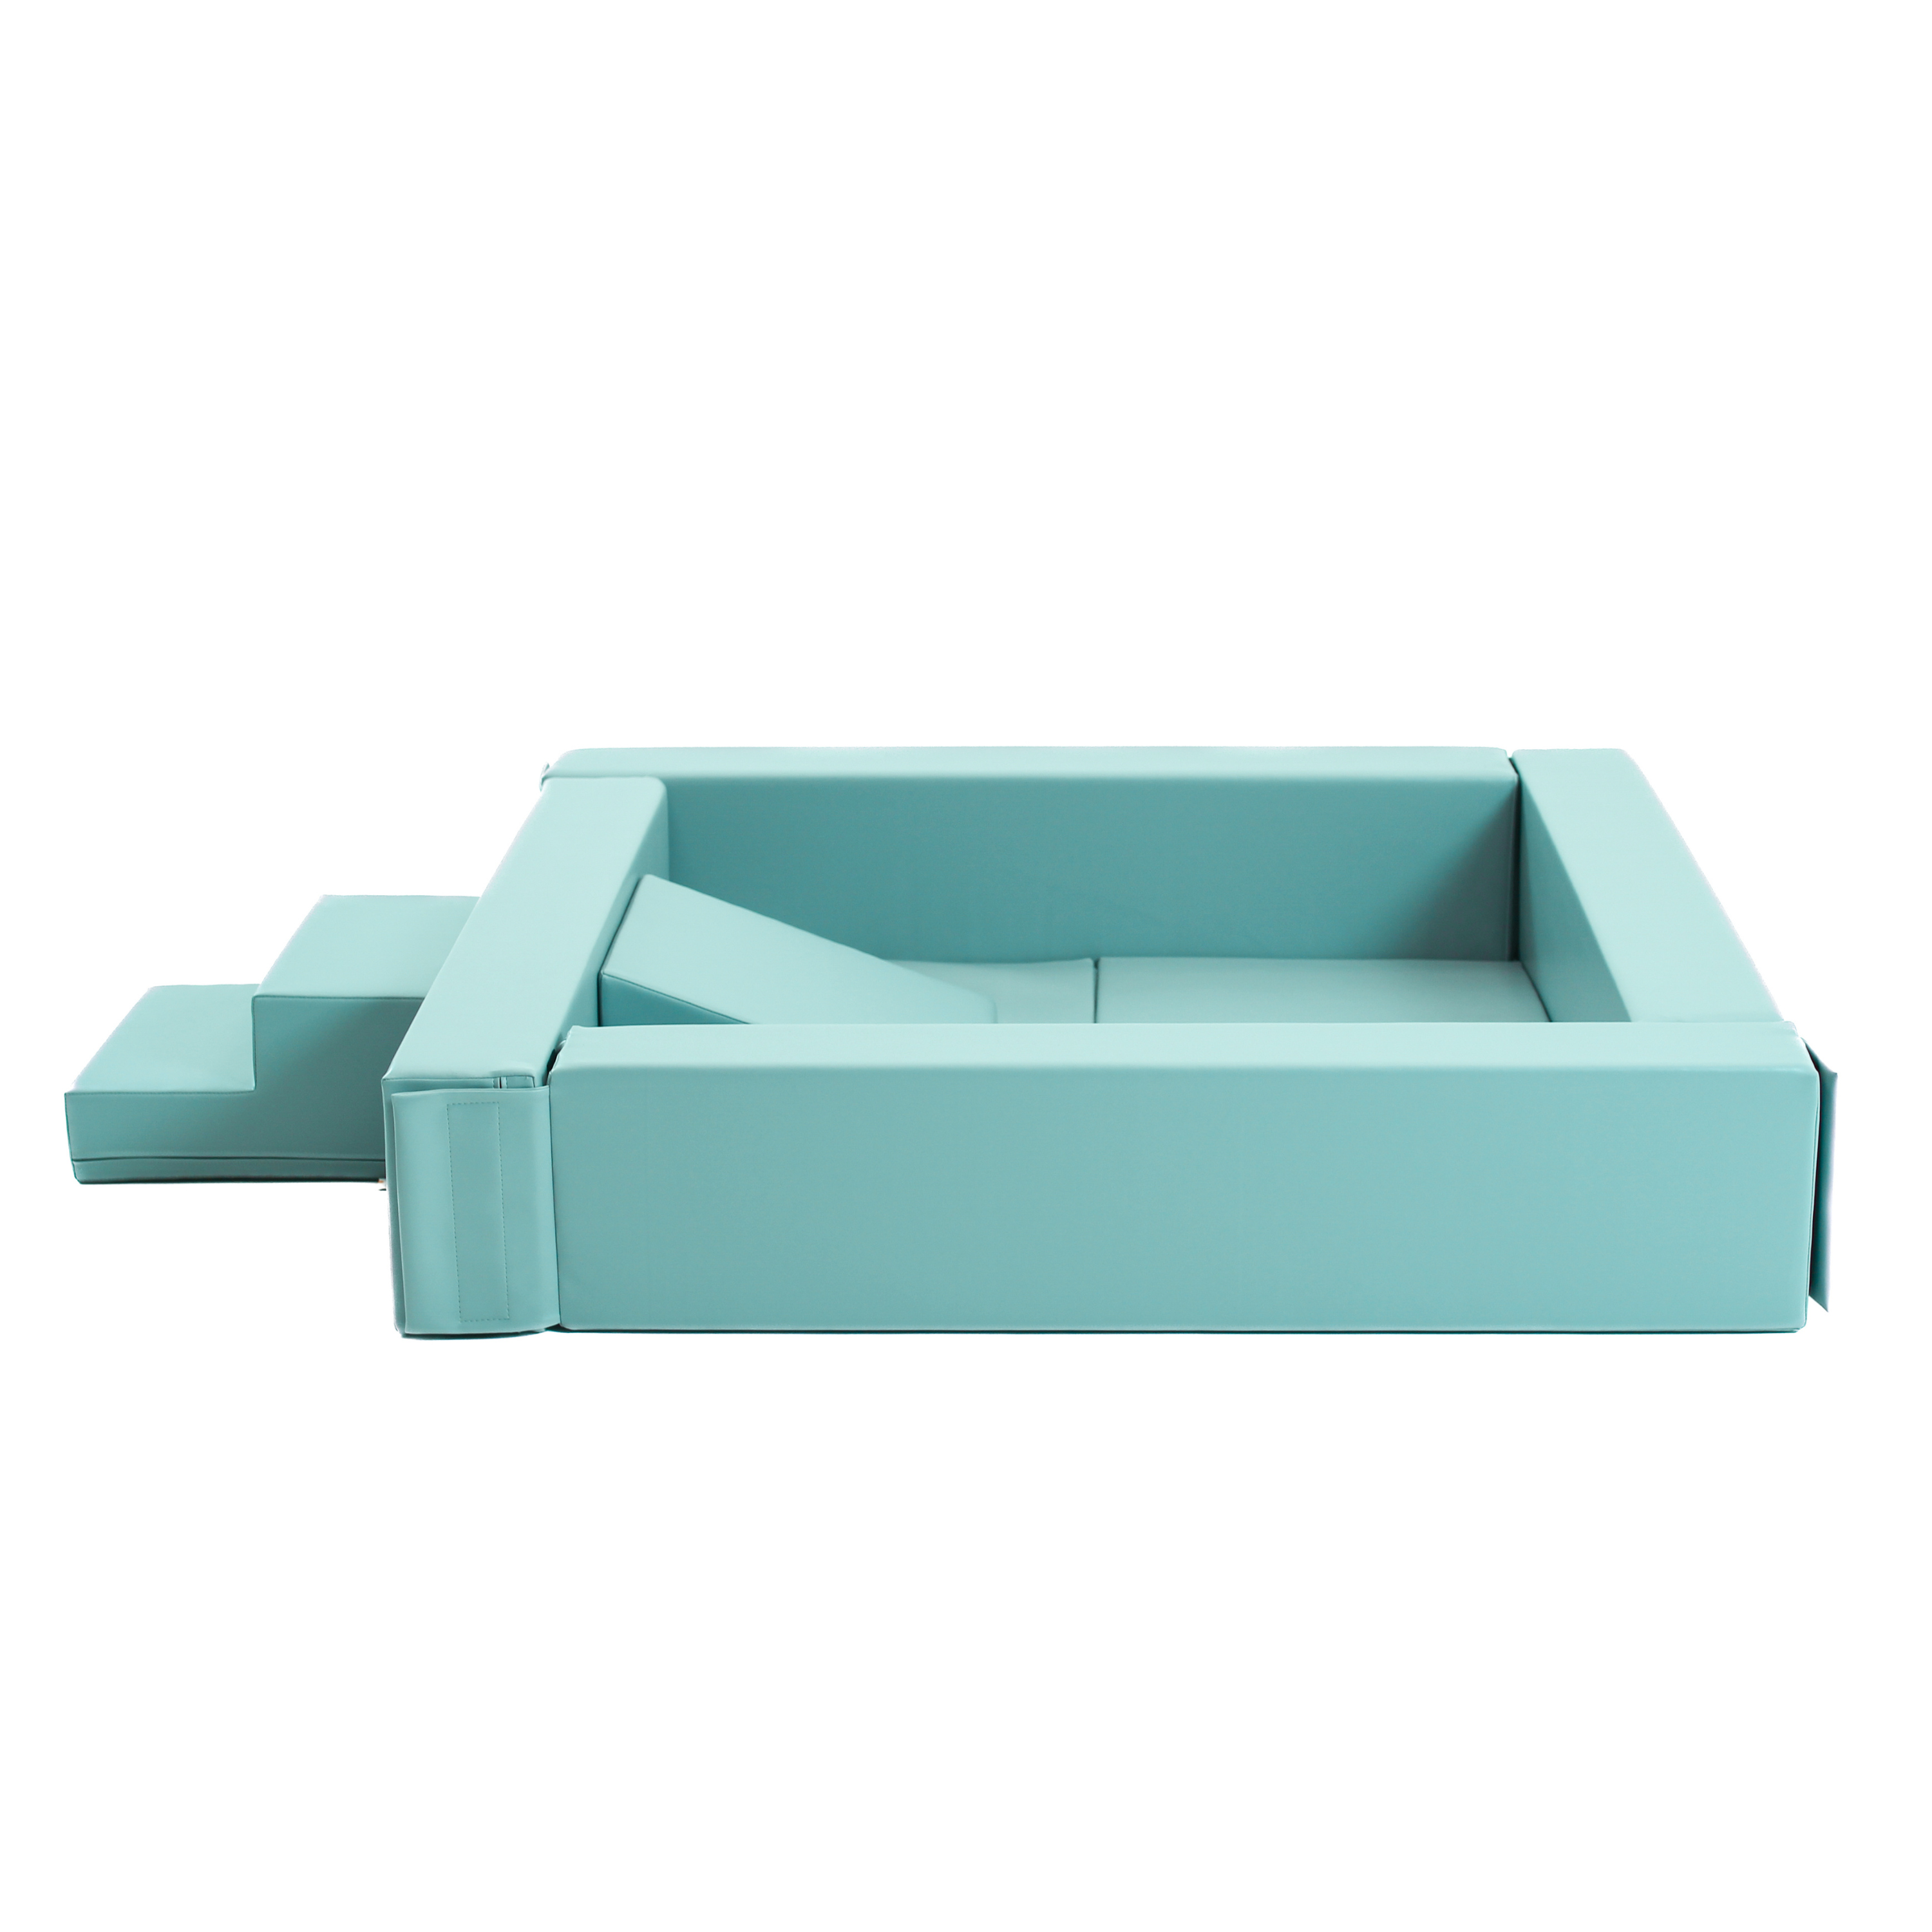 Turquoise blue ball pit set from IGLU